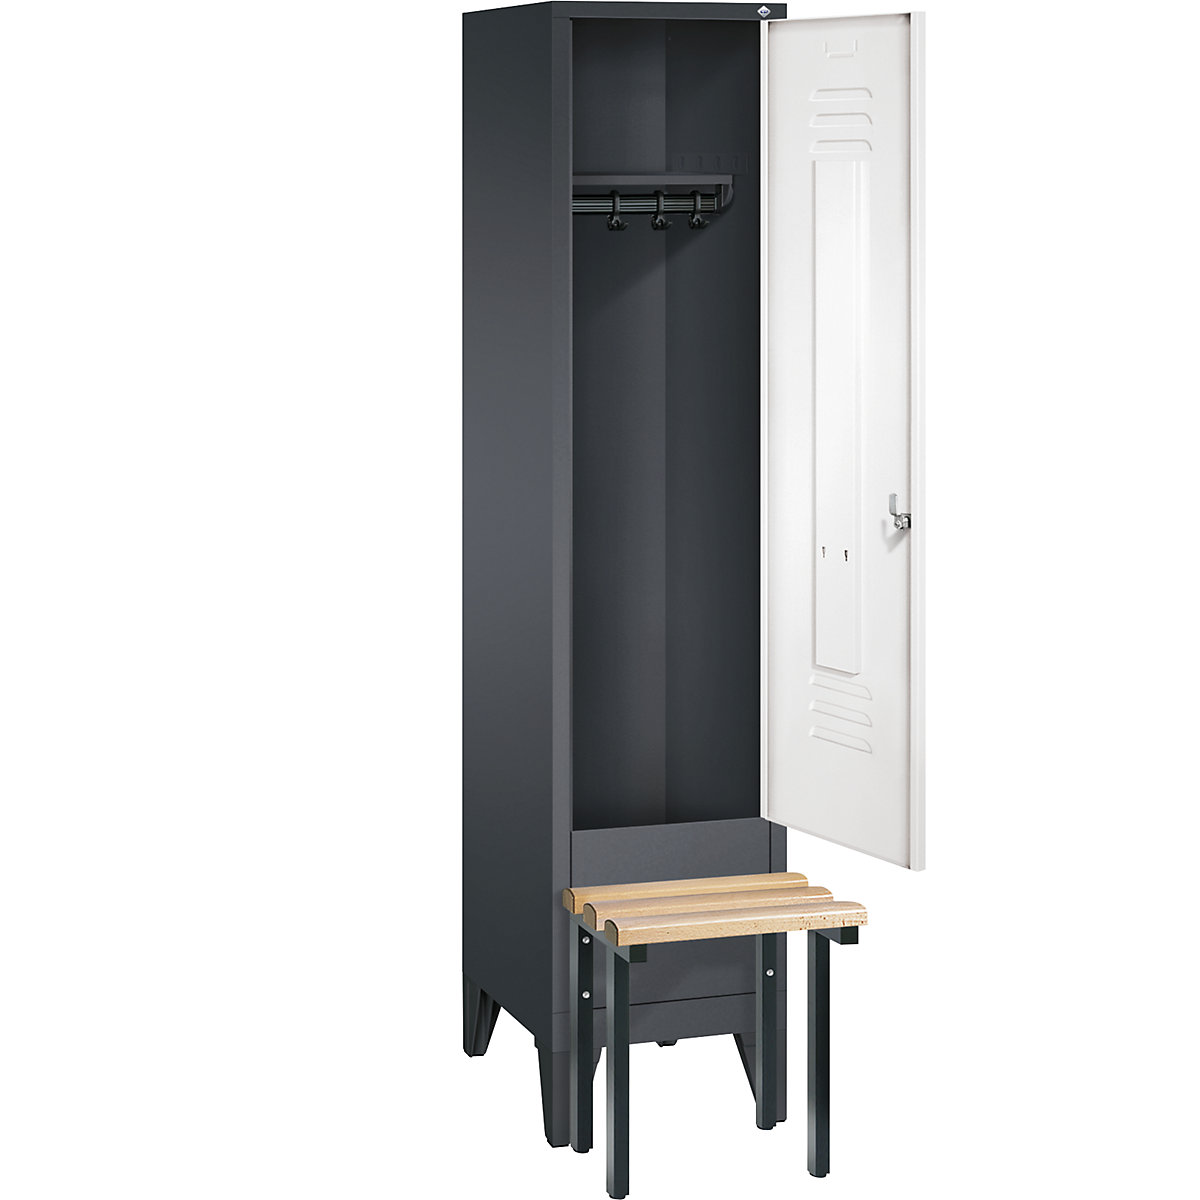 CLASSIC cloakroom locker with bench mounted in front – C+P (Product illustration 17)-16